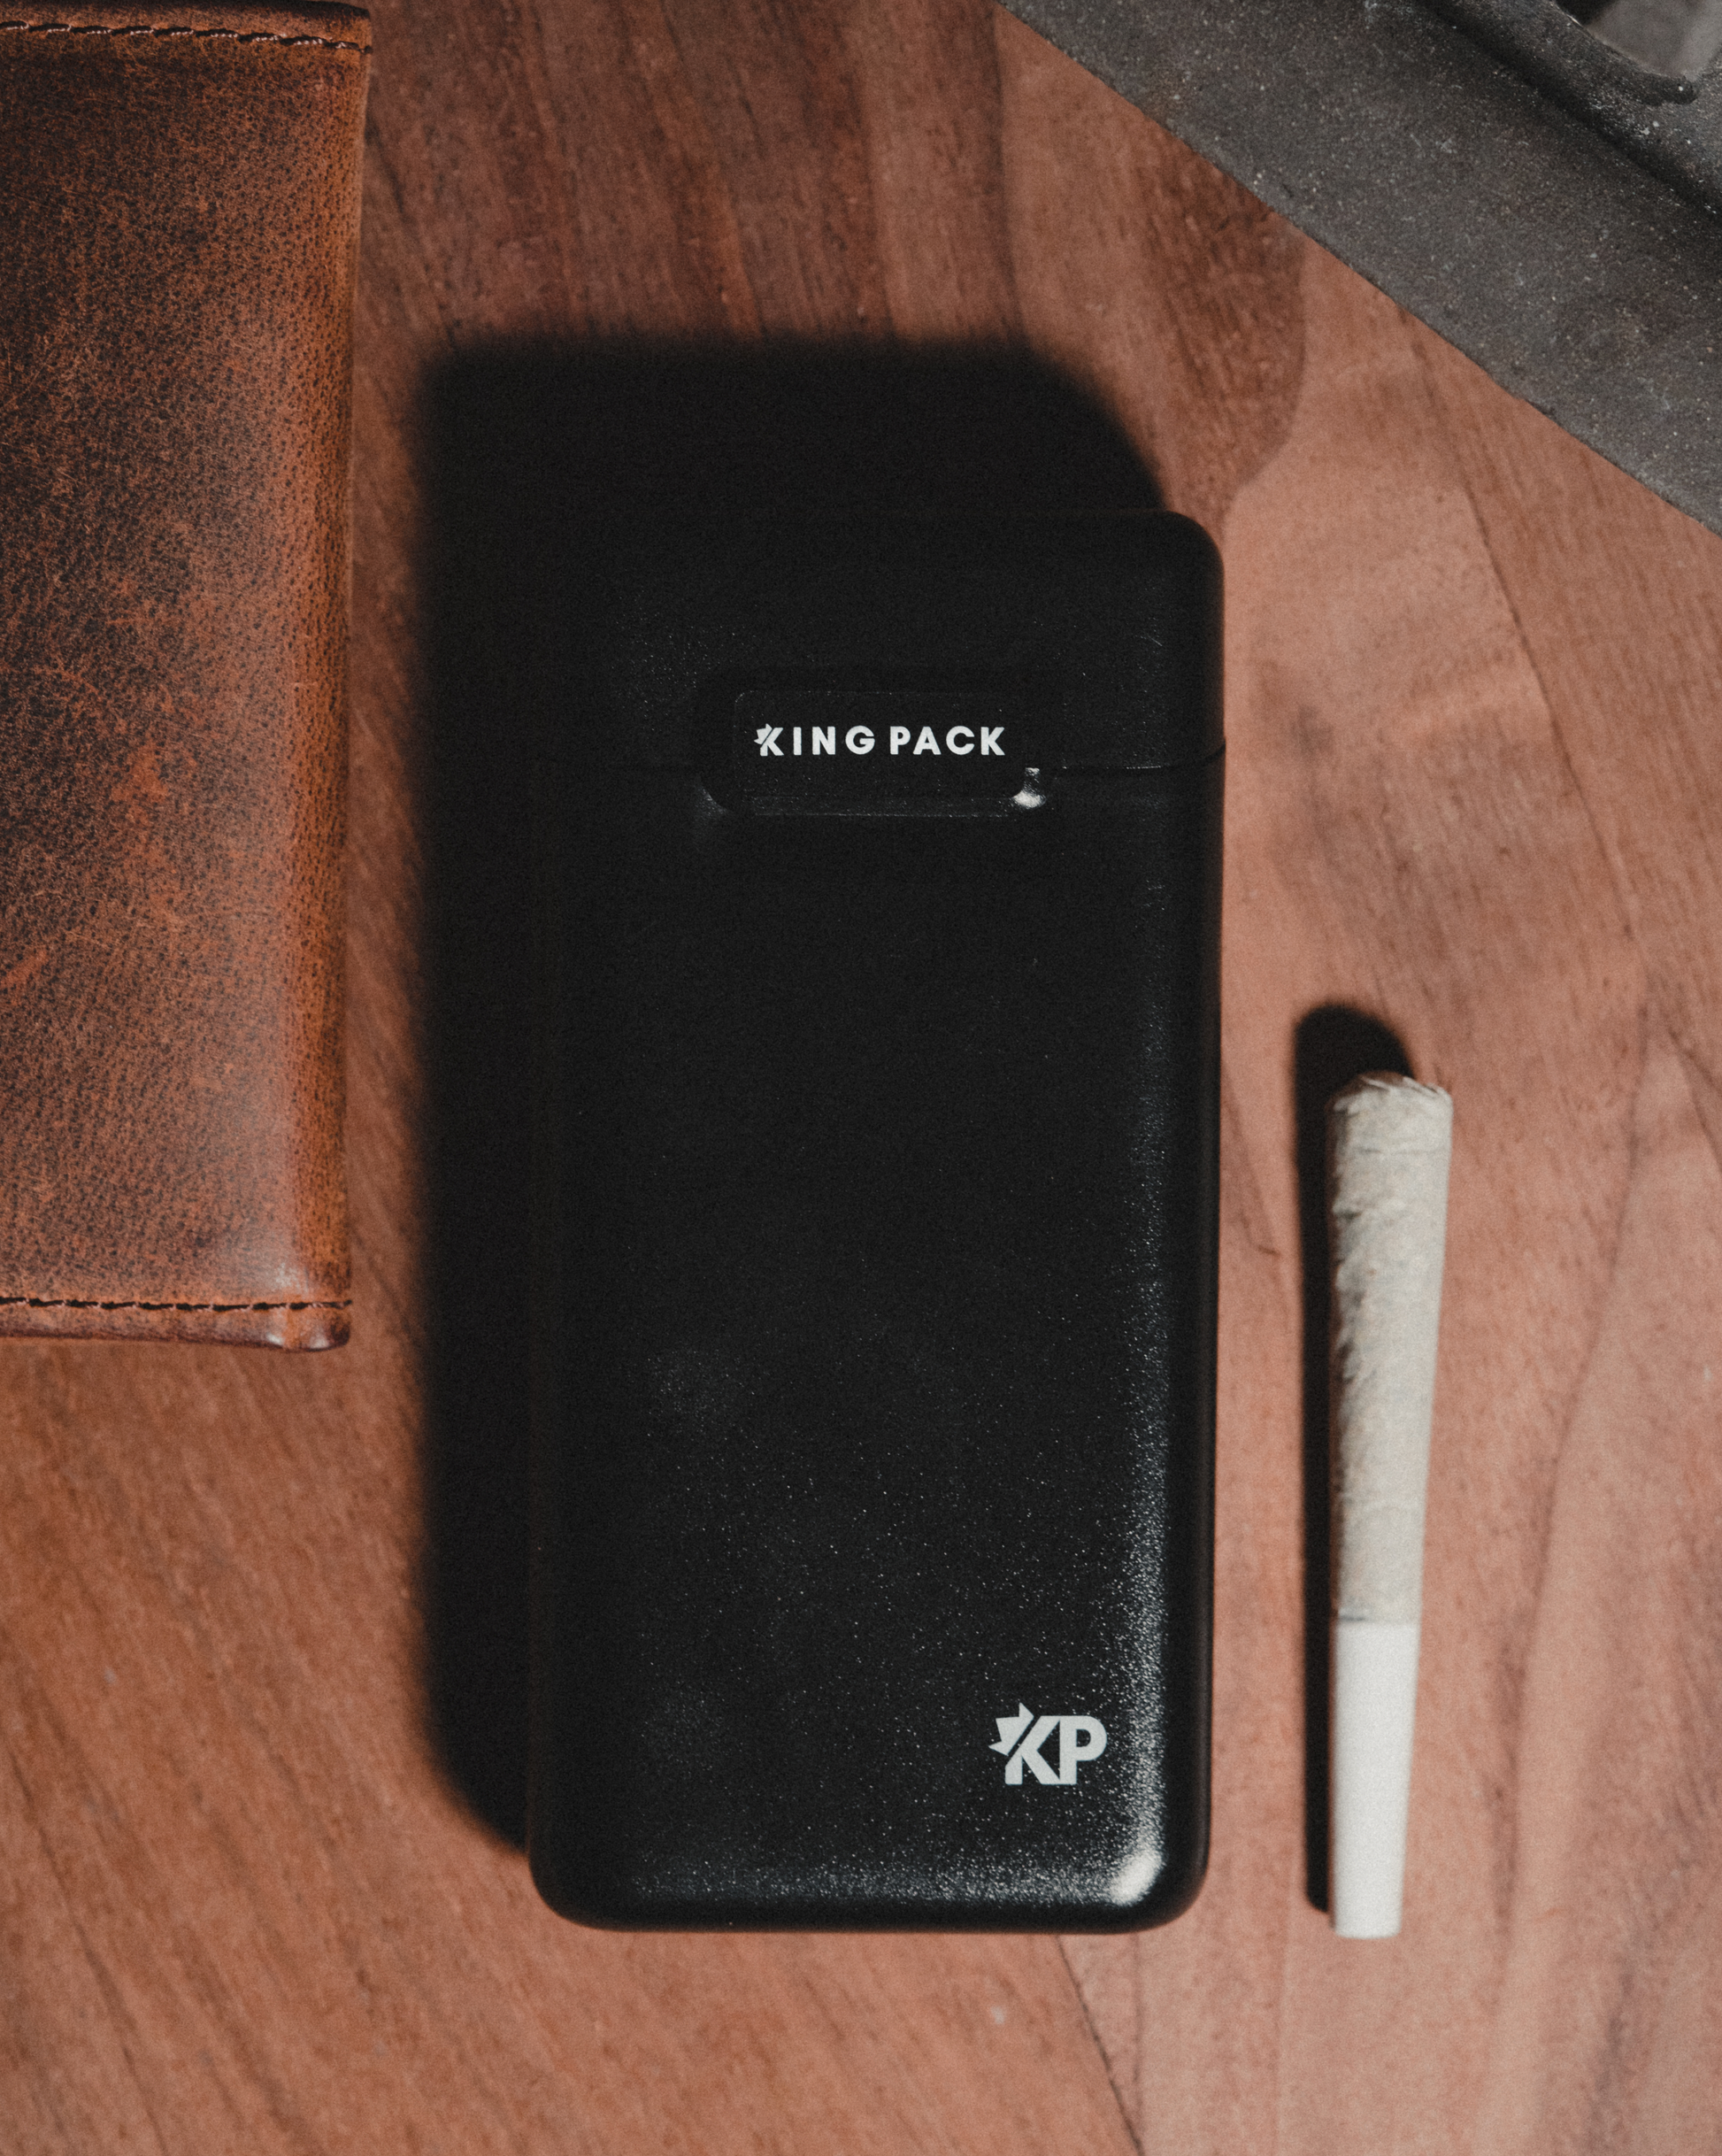 Top front view of black Kingpack case with one joint